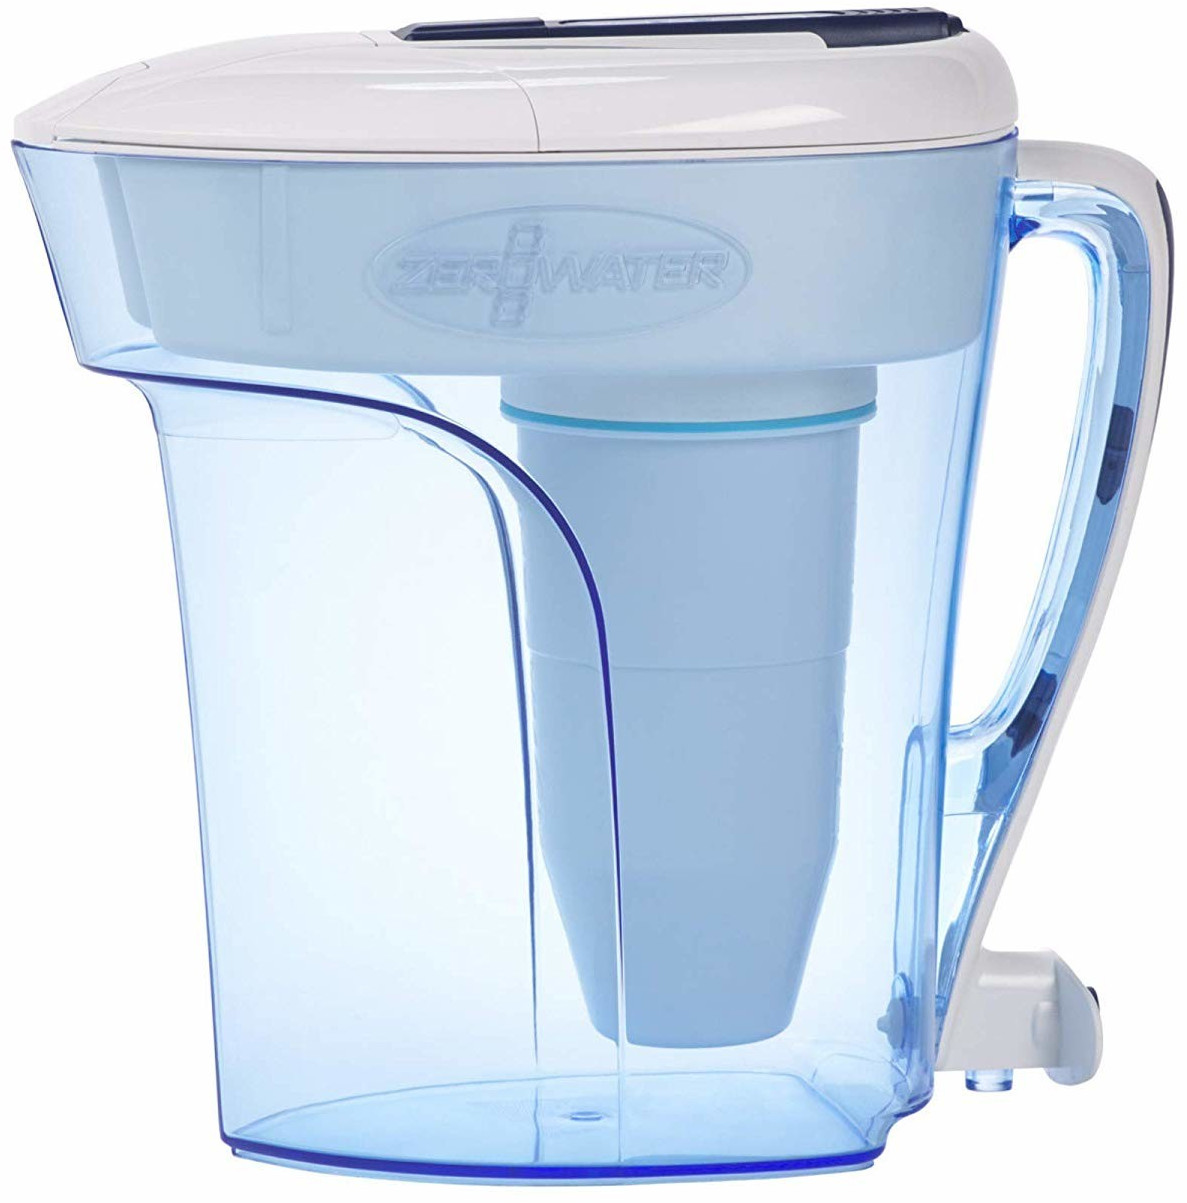 buy-zero-water-5-stage-water-filter-jug-from-40-00-today-best